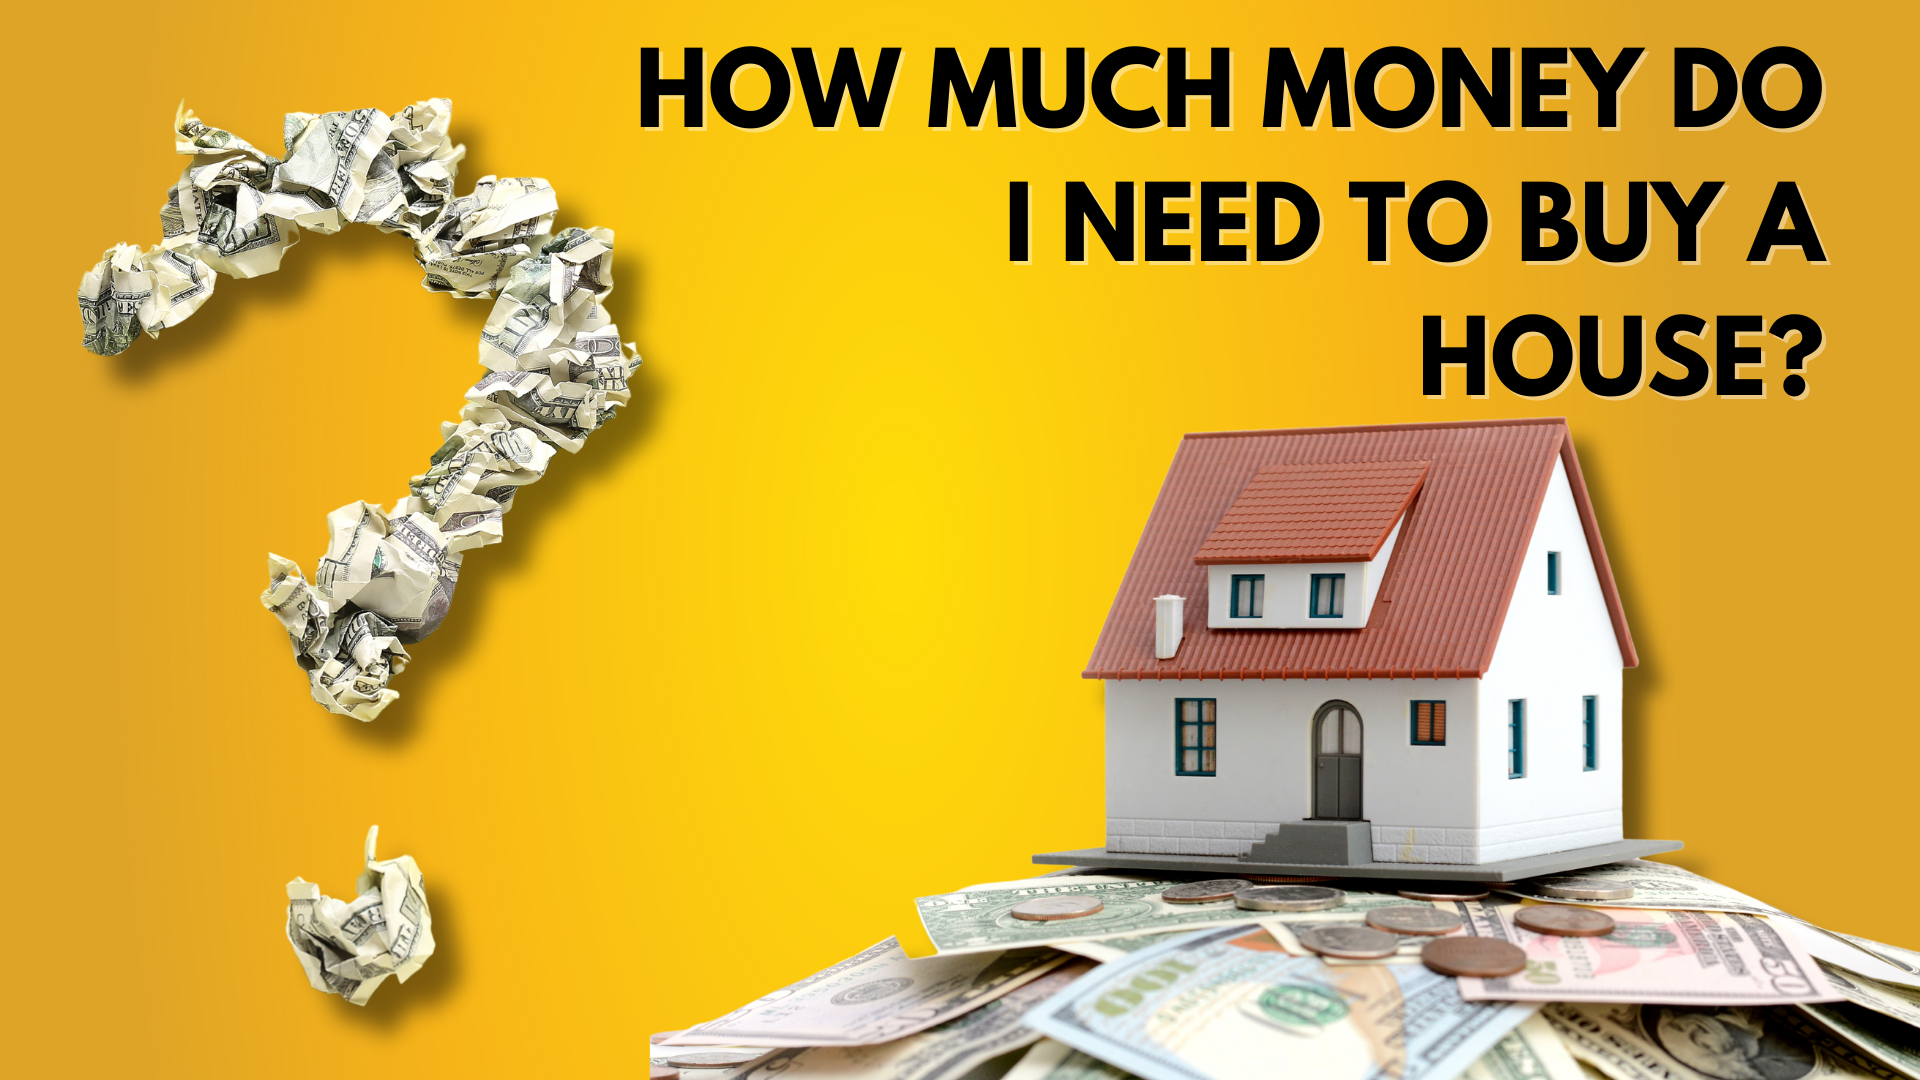 How much money do I need to buy a home?